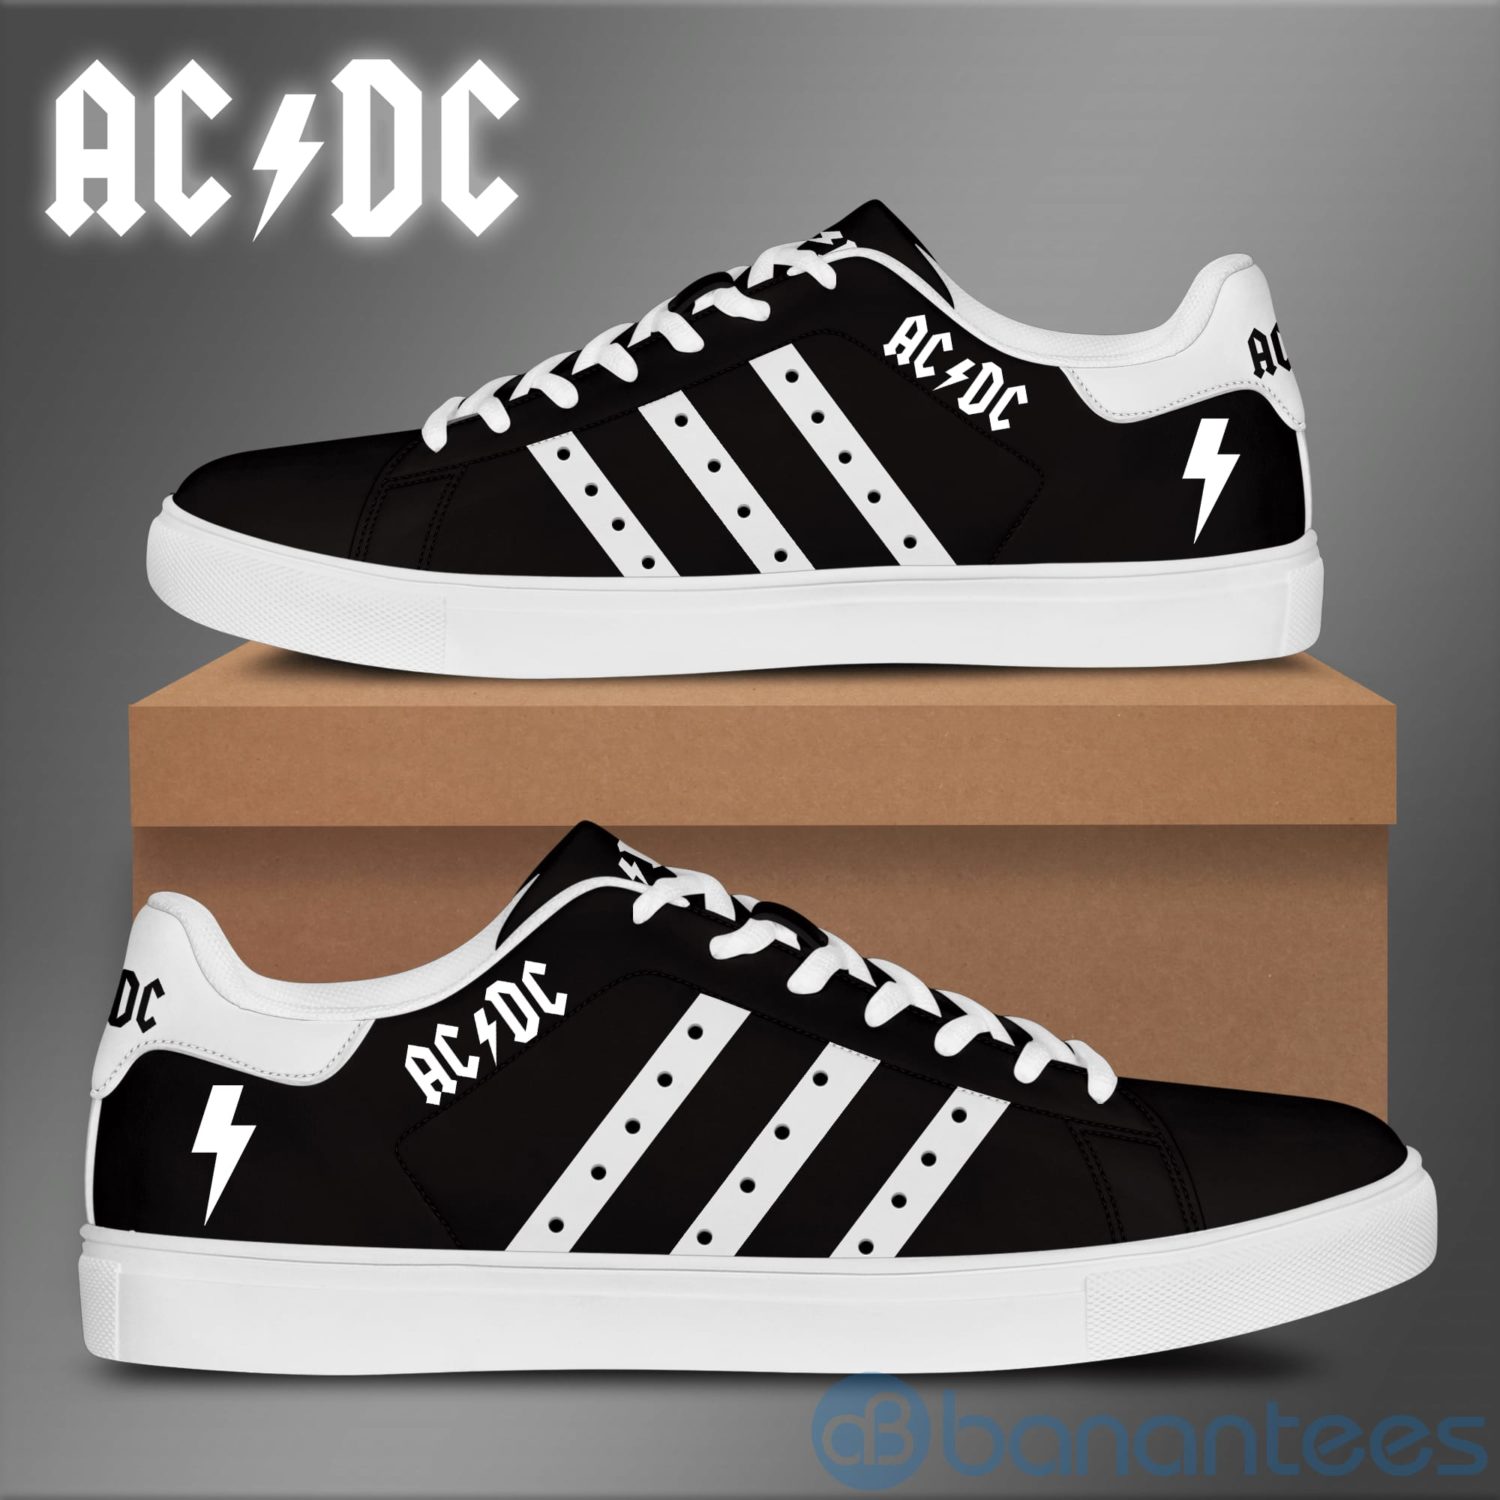 Acdc White Striped Black Low Top Skate Shoes